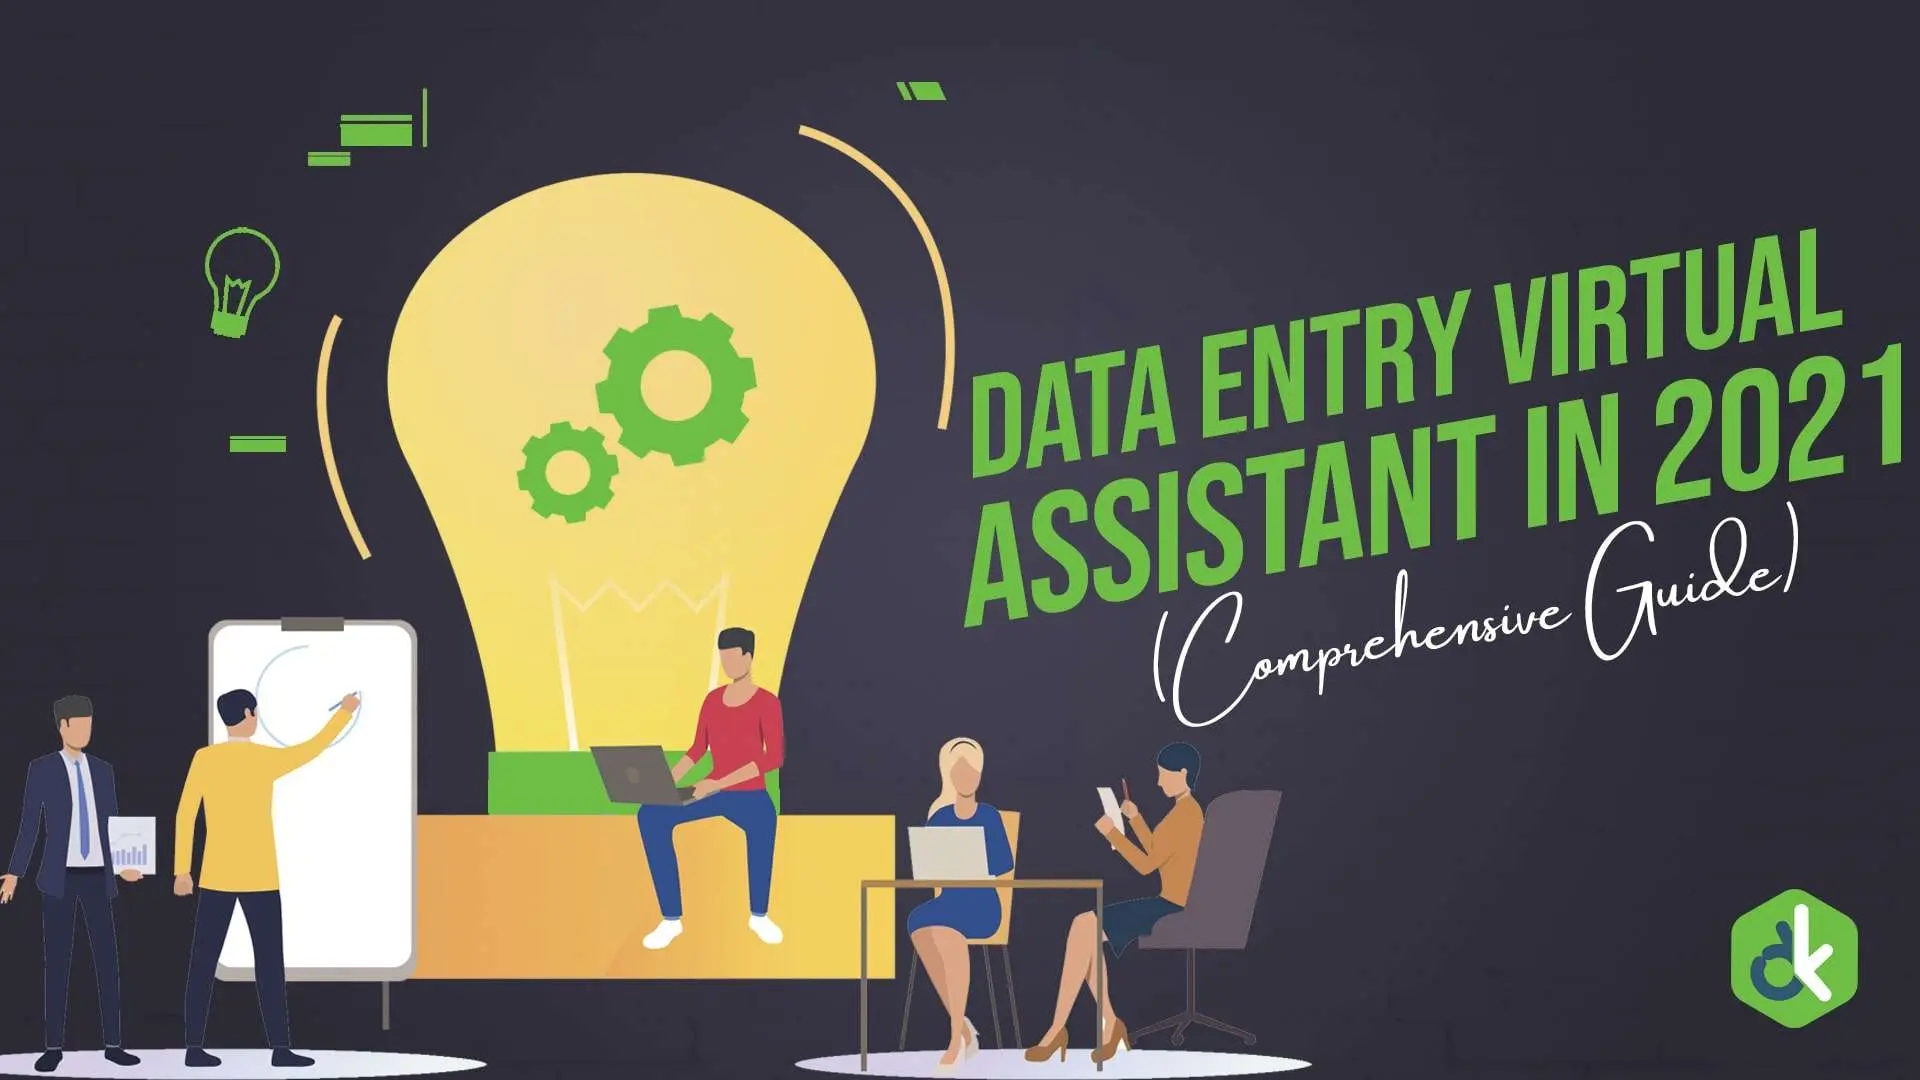 Data Entry Virtual Assistant In 2021 (Comprehensive Guide)